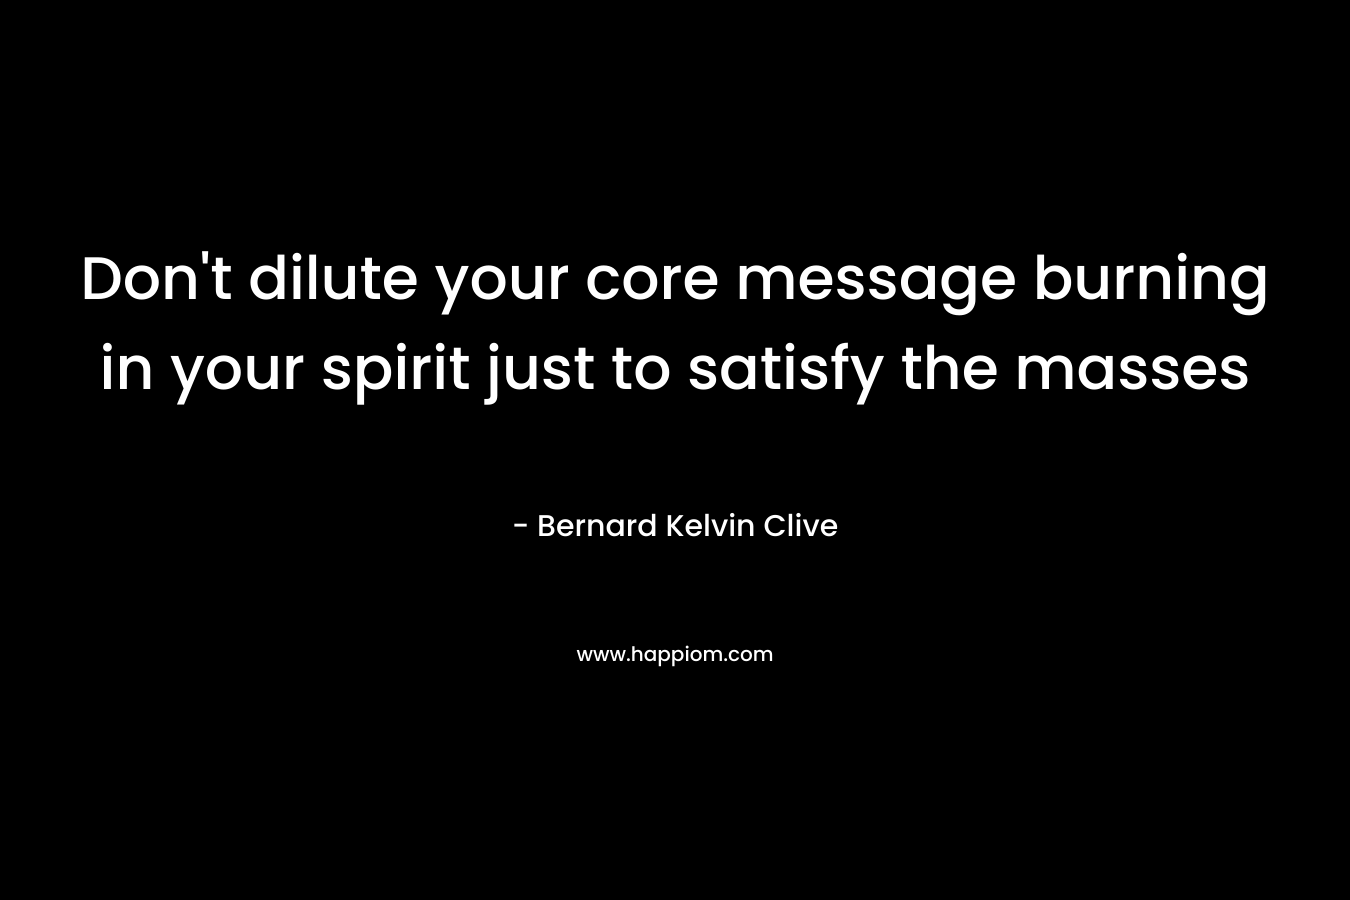 Don't dilute your core message burning in your spirit just to satisfy the masses